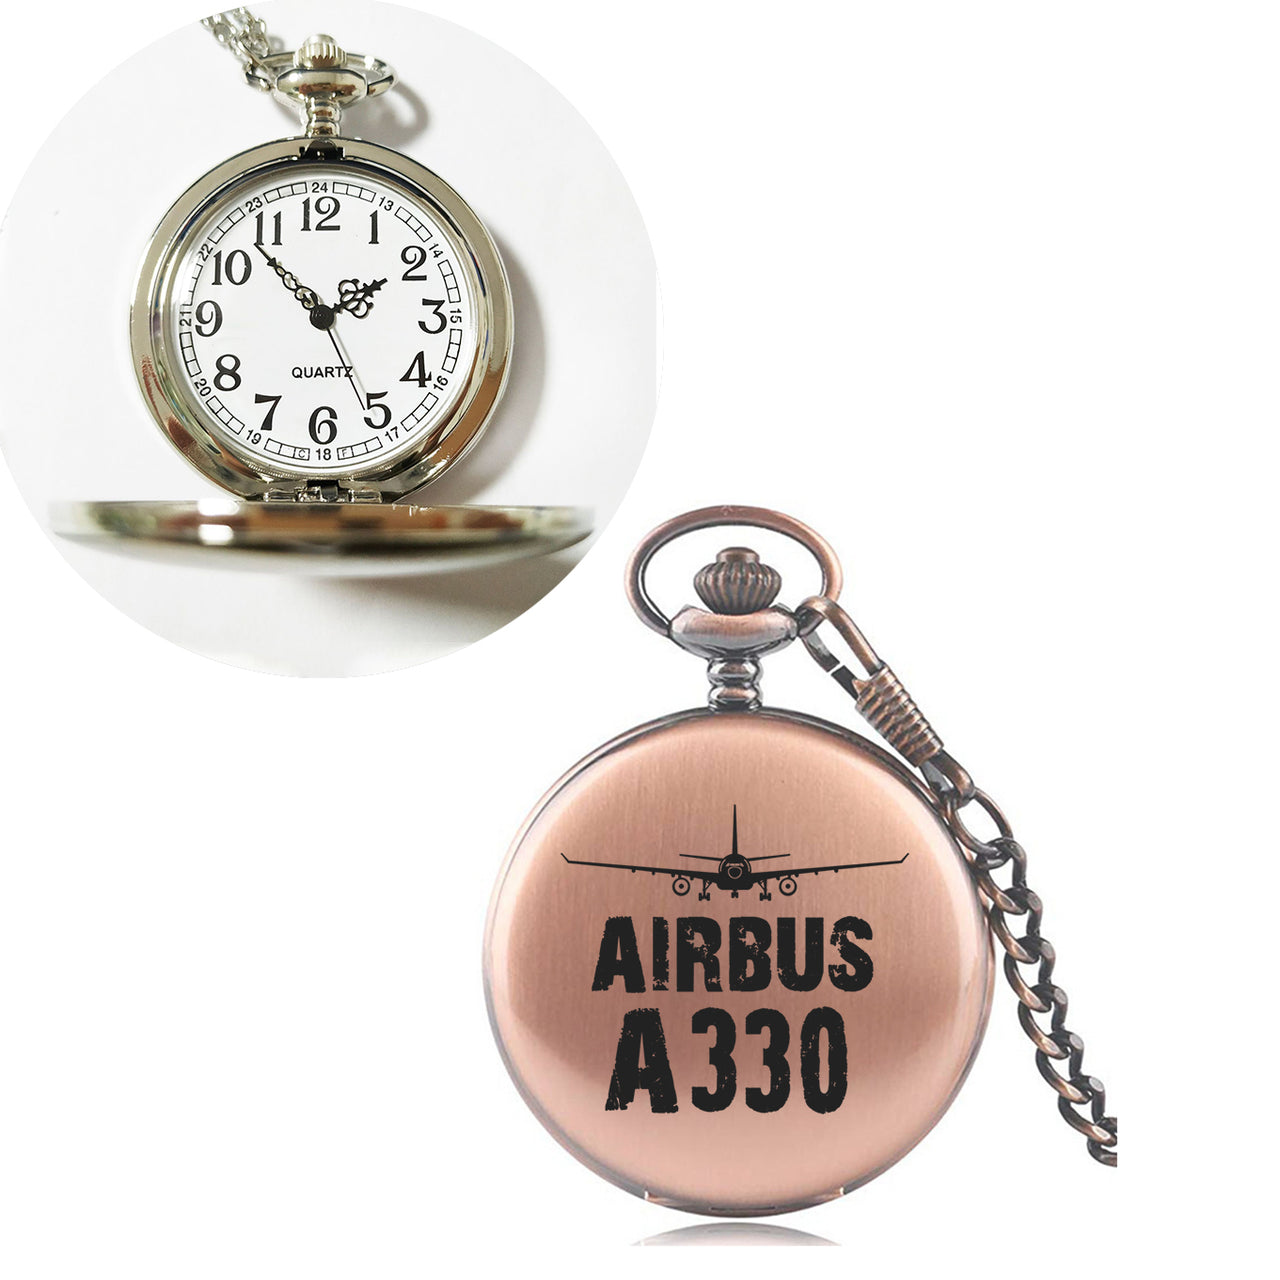 Airbus A330 & Plane Designed Pocket Watches